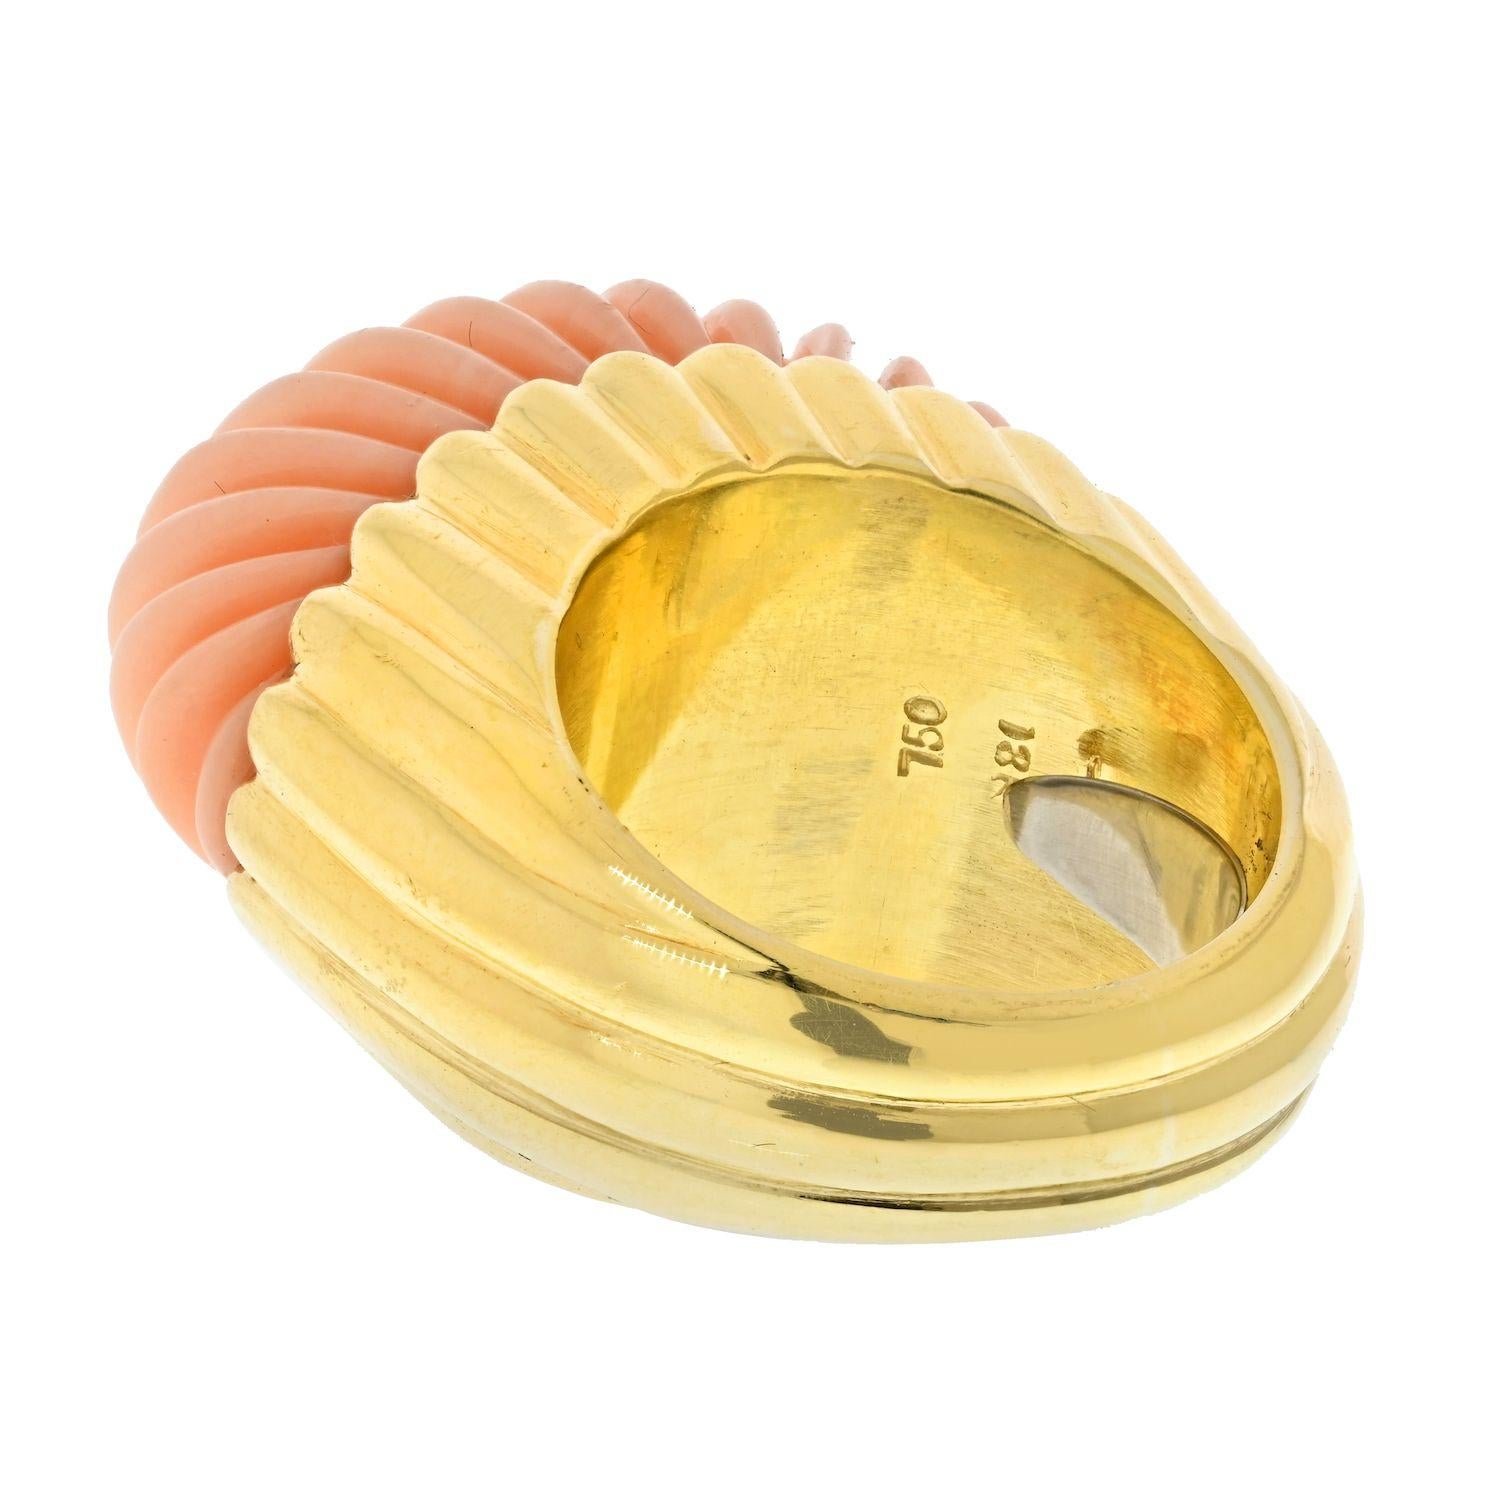 This fabulous 1970's right hand/cocktail ring designed by David Webb. This beautiful ring features a carved cabochon cut coral in 18k yellow gold.  The carved piece of coral features a gorgeous ribbed appearance that provides a wonderful contrast